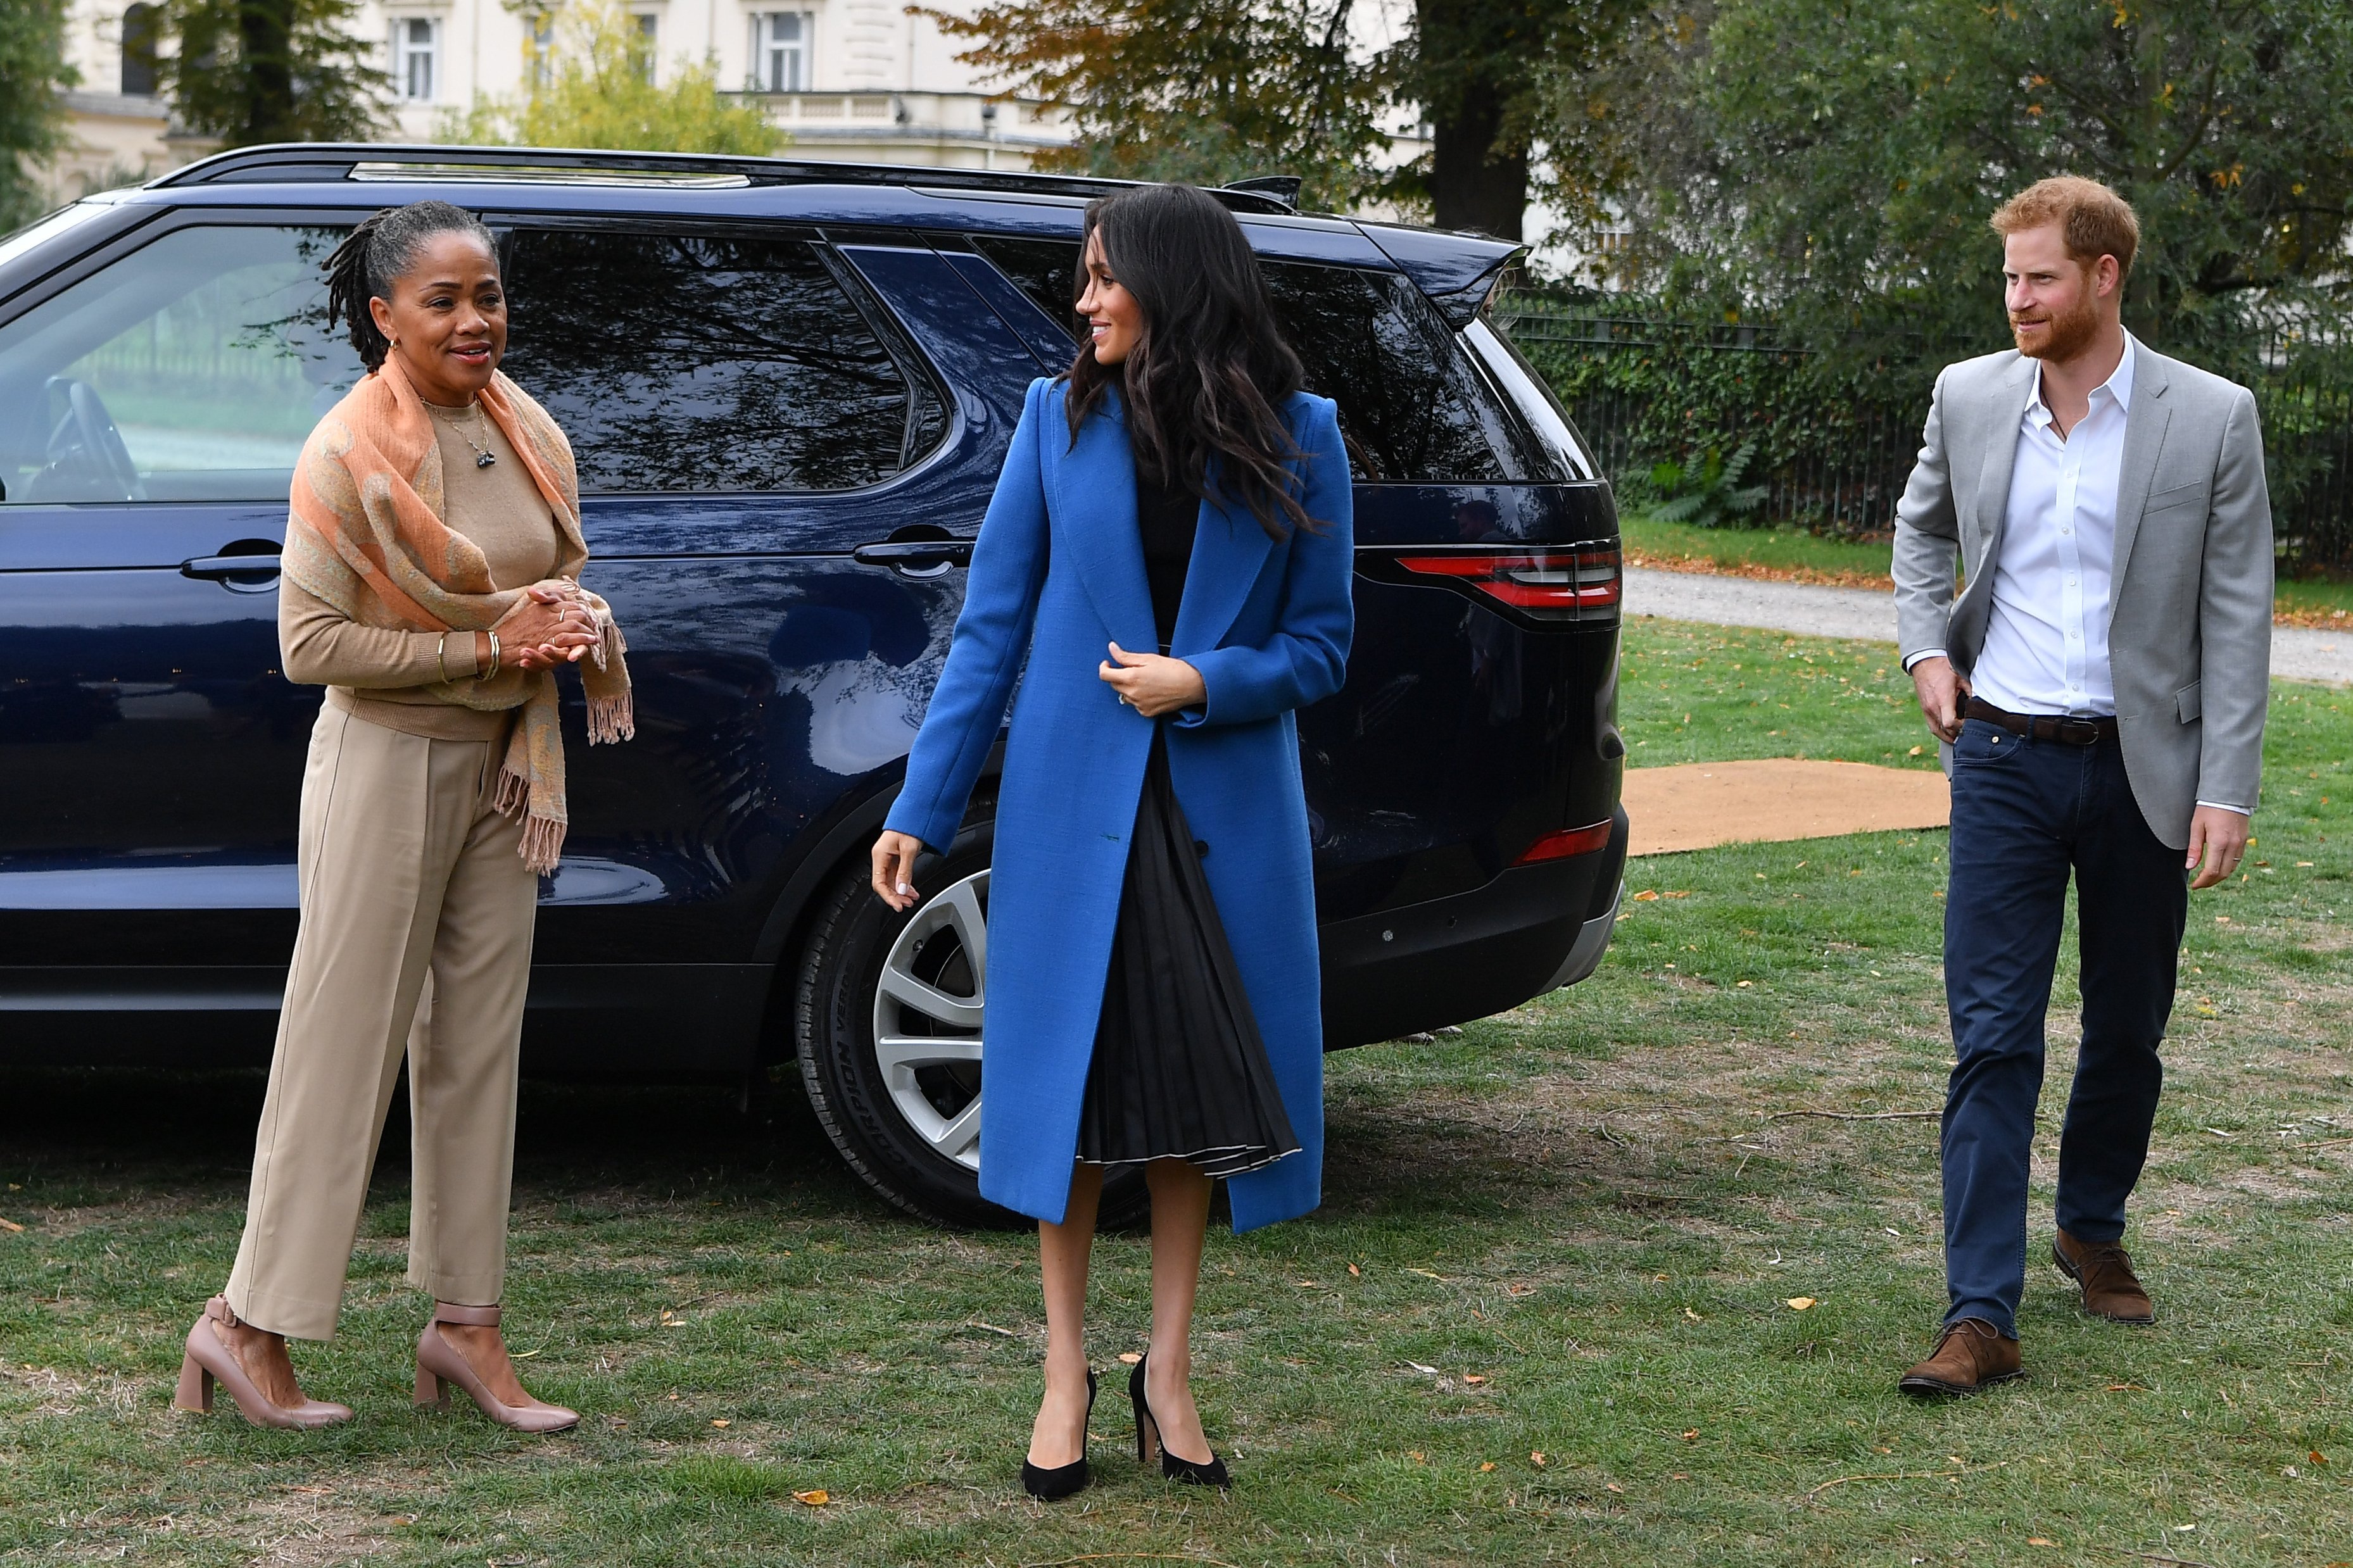 Doria Ragland, Meghan Markle and Prince Harry at Kensington Palace on September 20, 2018 in London, England. | Photo: Getty Images